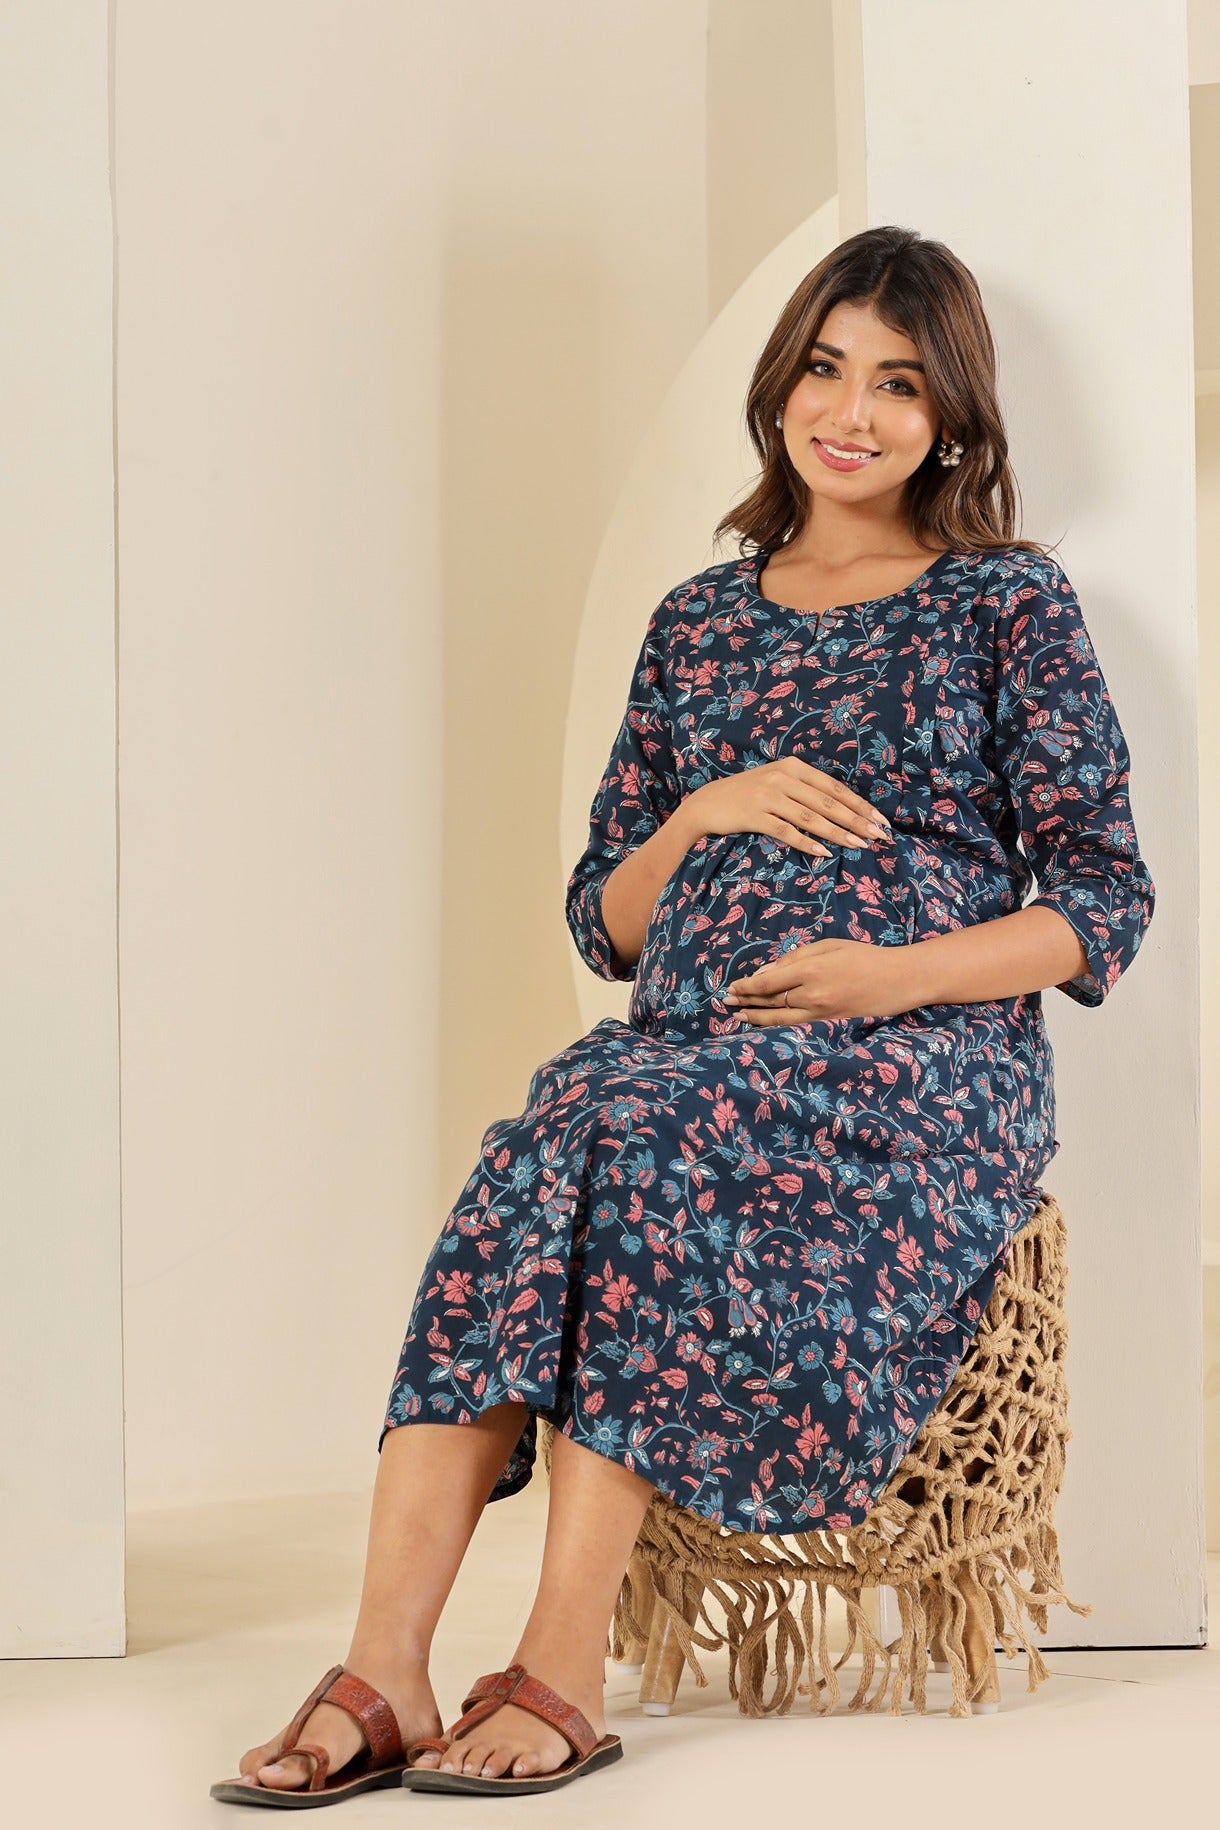 Cuchikoo by Laali Forever Love Floral Blue Maternity Dress